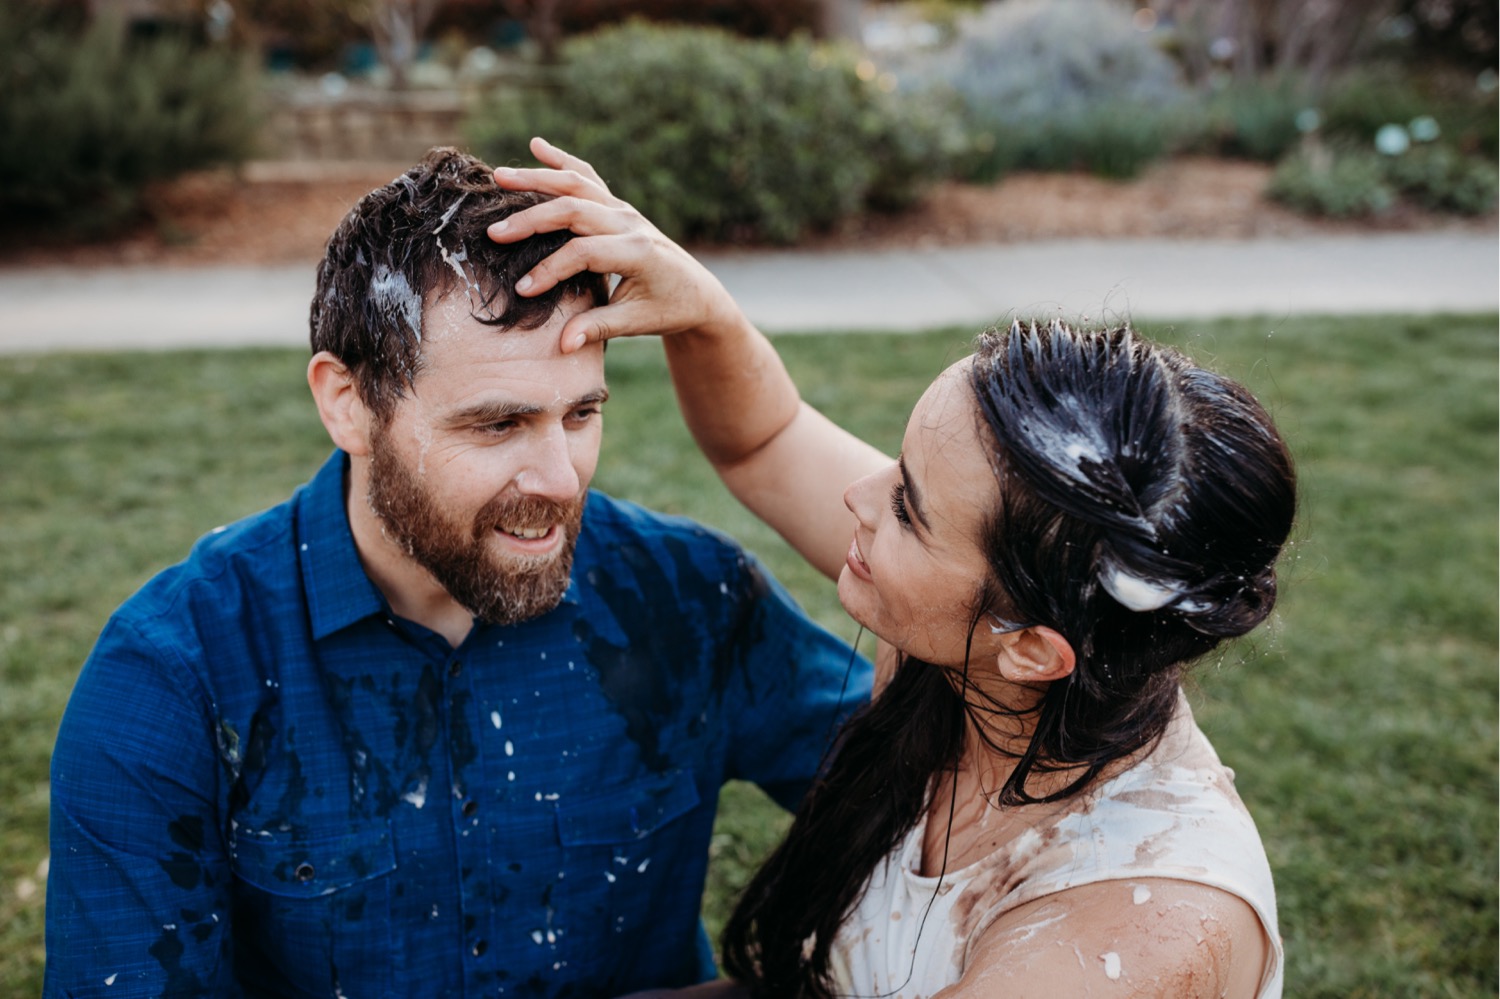 Woman wipes ice cream off of her fiance's forehead after their engagement shoot ice cream fight.